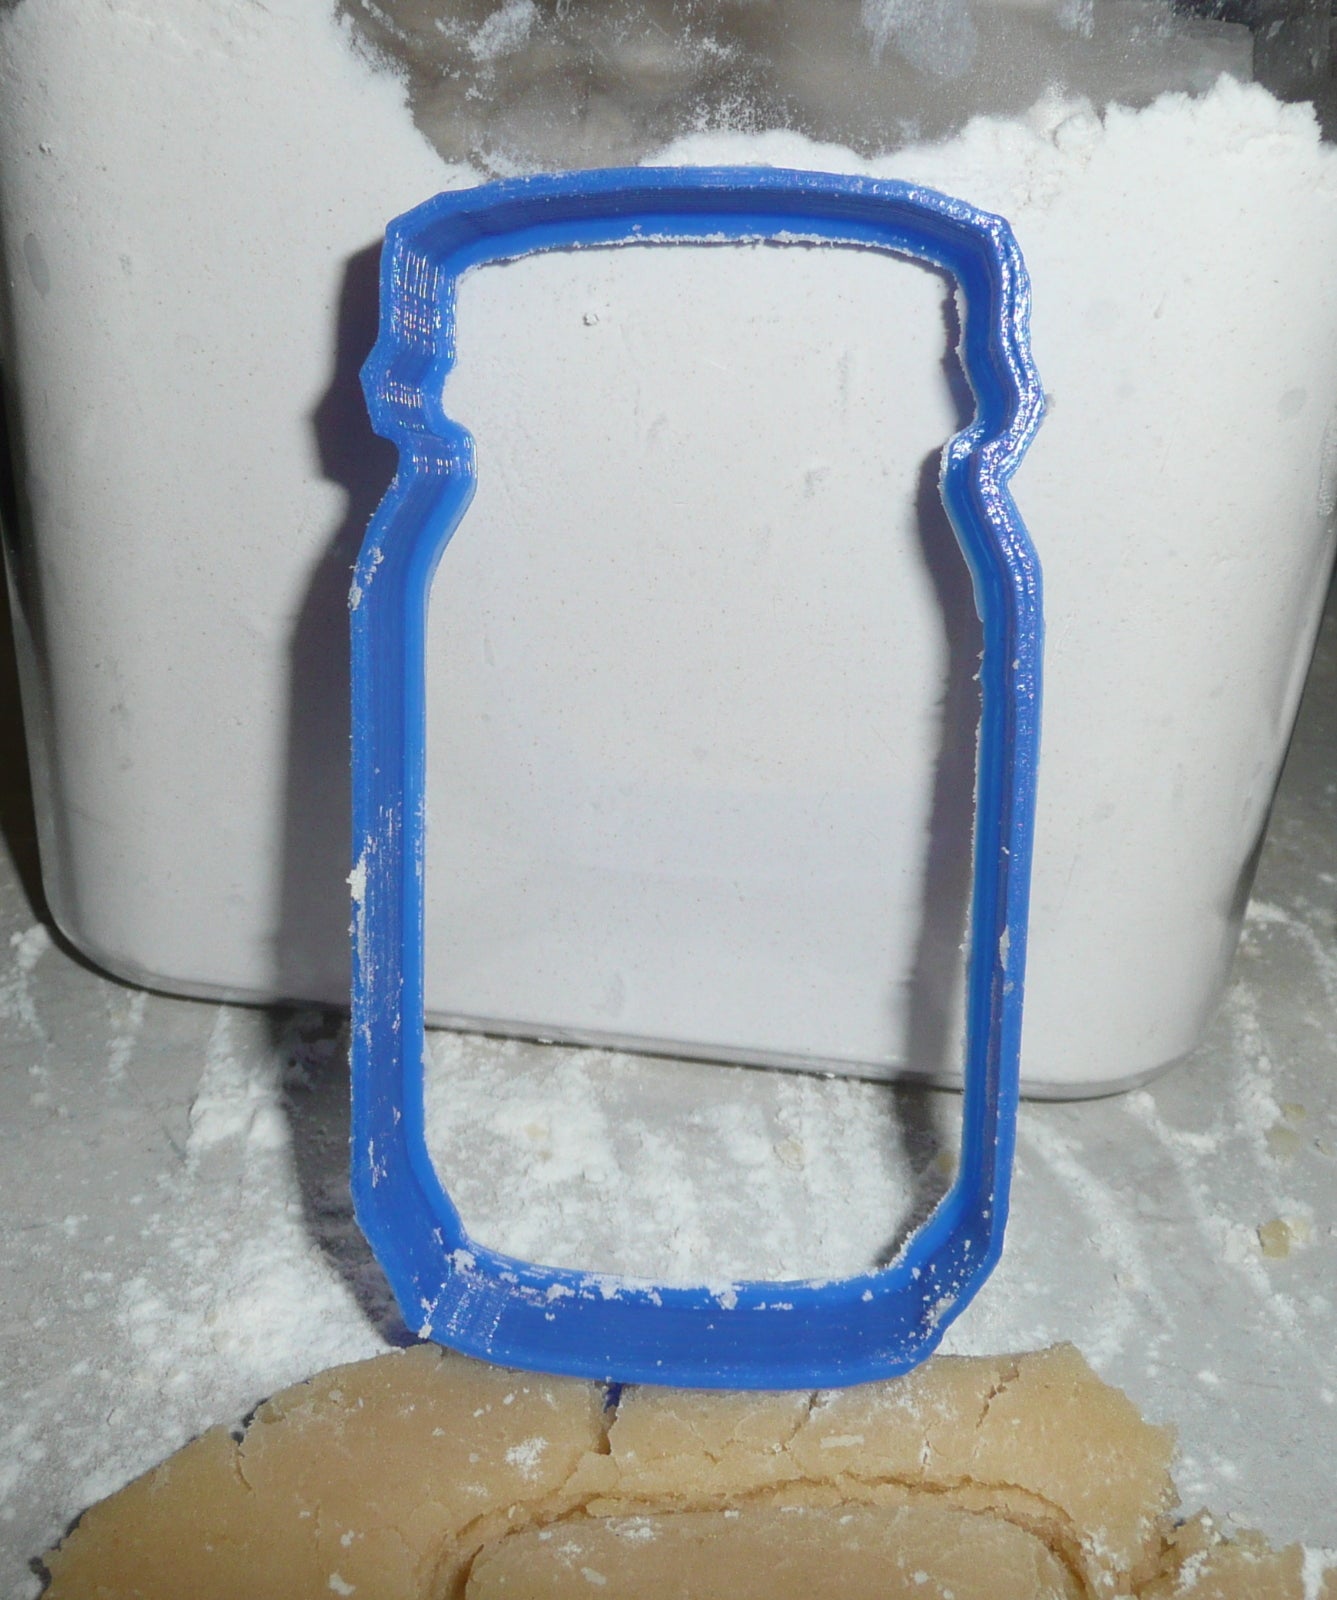 Mason Jar Outline Special Occasion Cookie Cutter Baking Tool Made In USA PR264